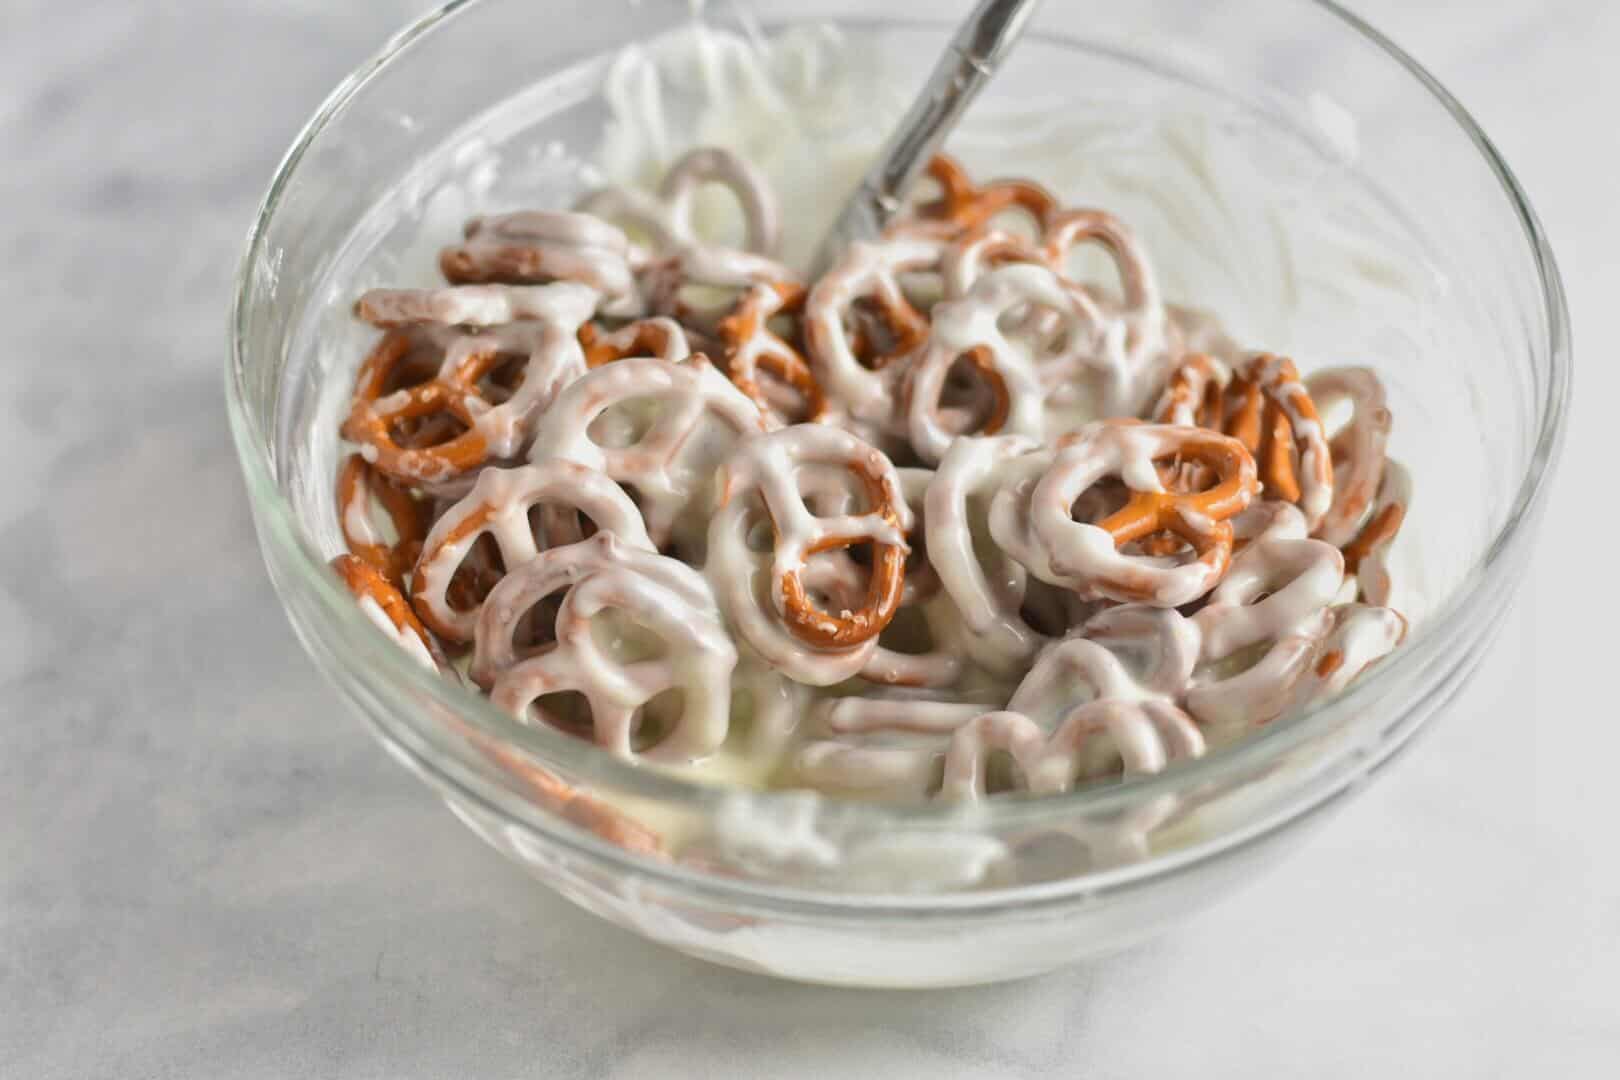 pretzels in bowl with melted chocoalte